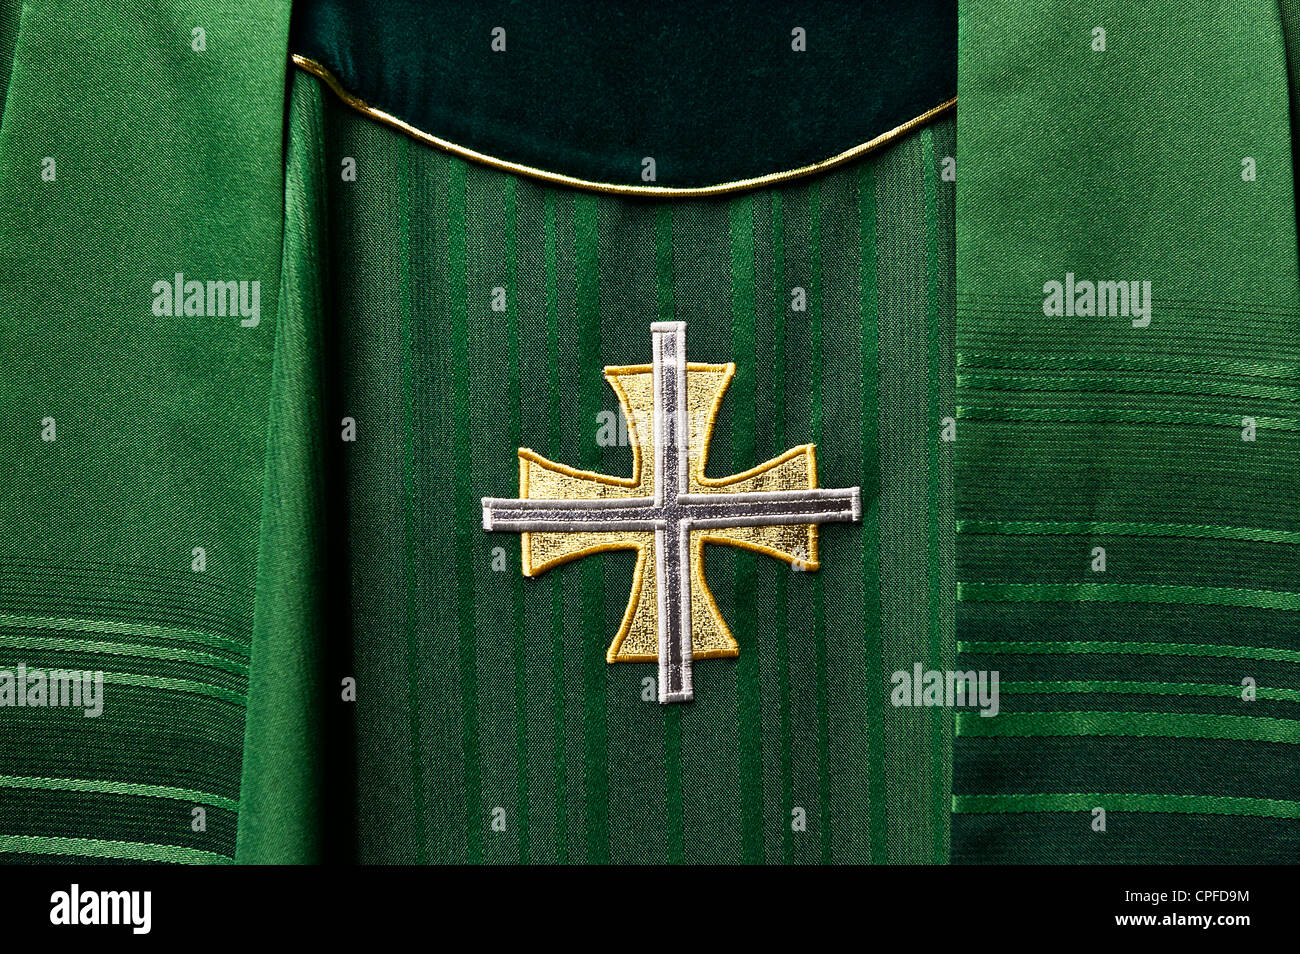 Priests liturgical vestments. Stock Photo